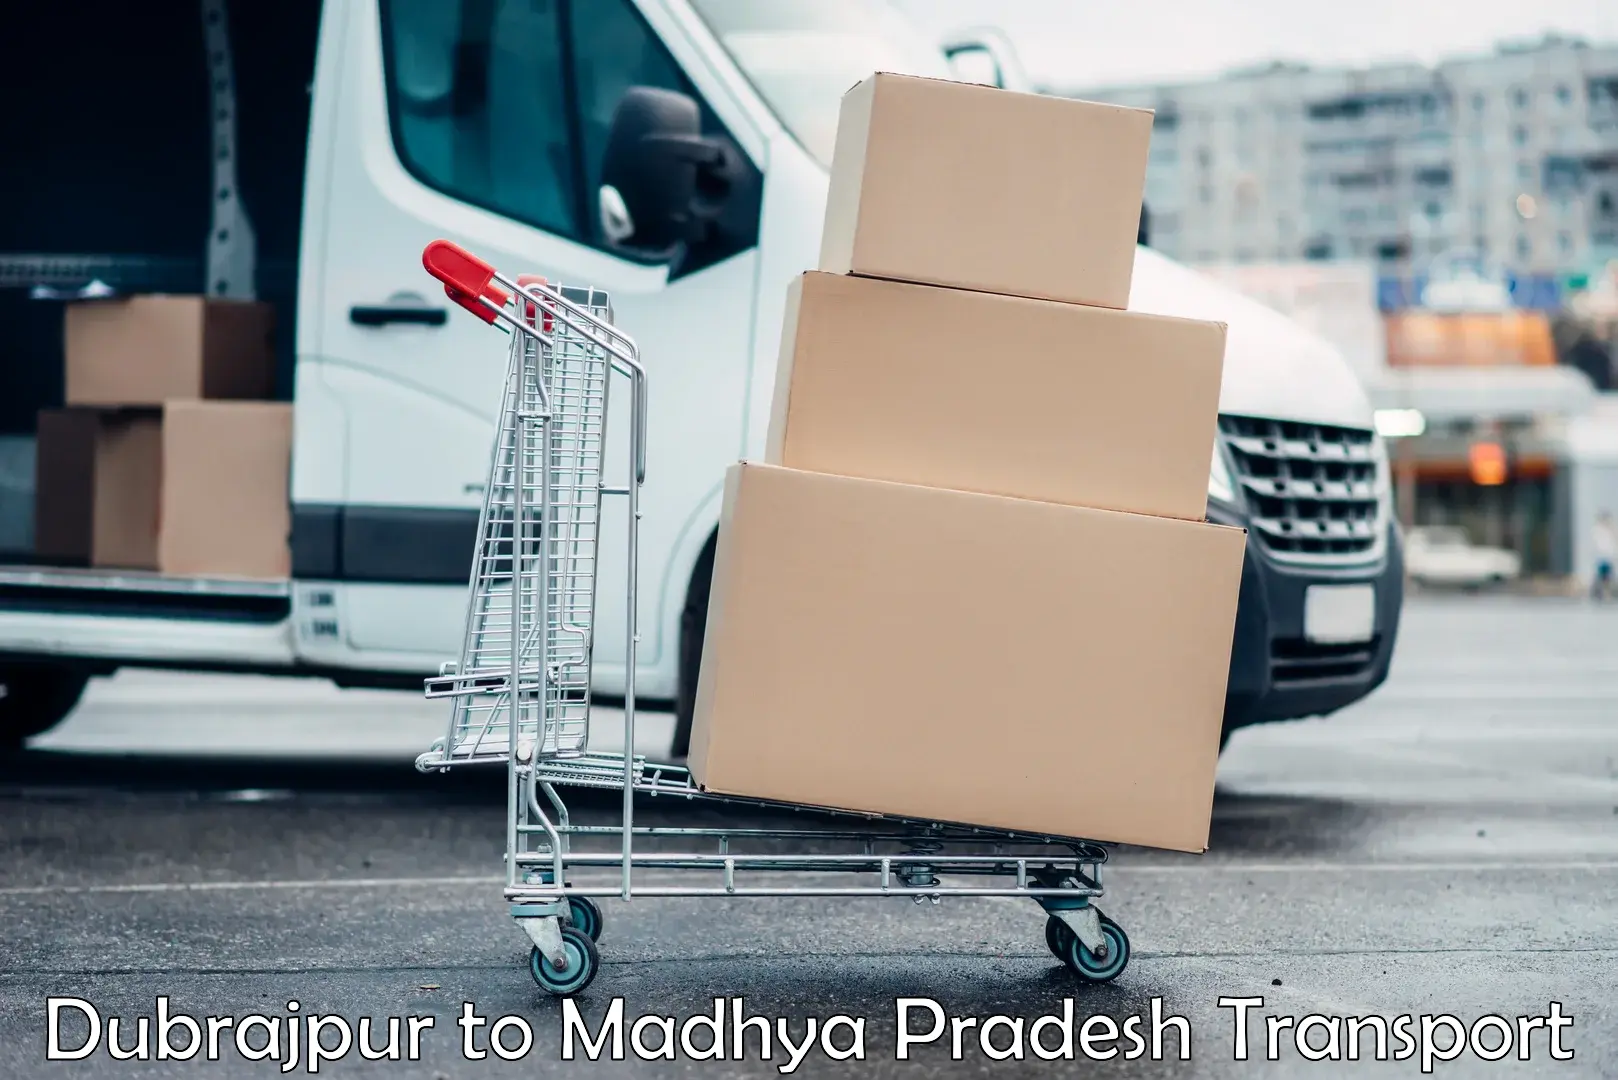 Domestic goods transportation services Dubrajpur to Udaipura